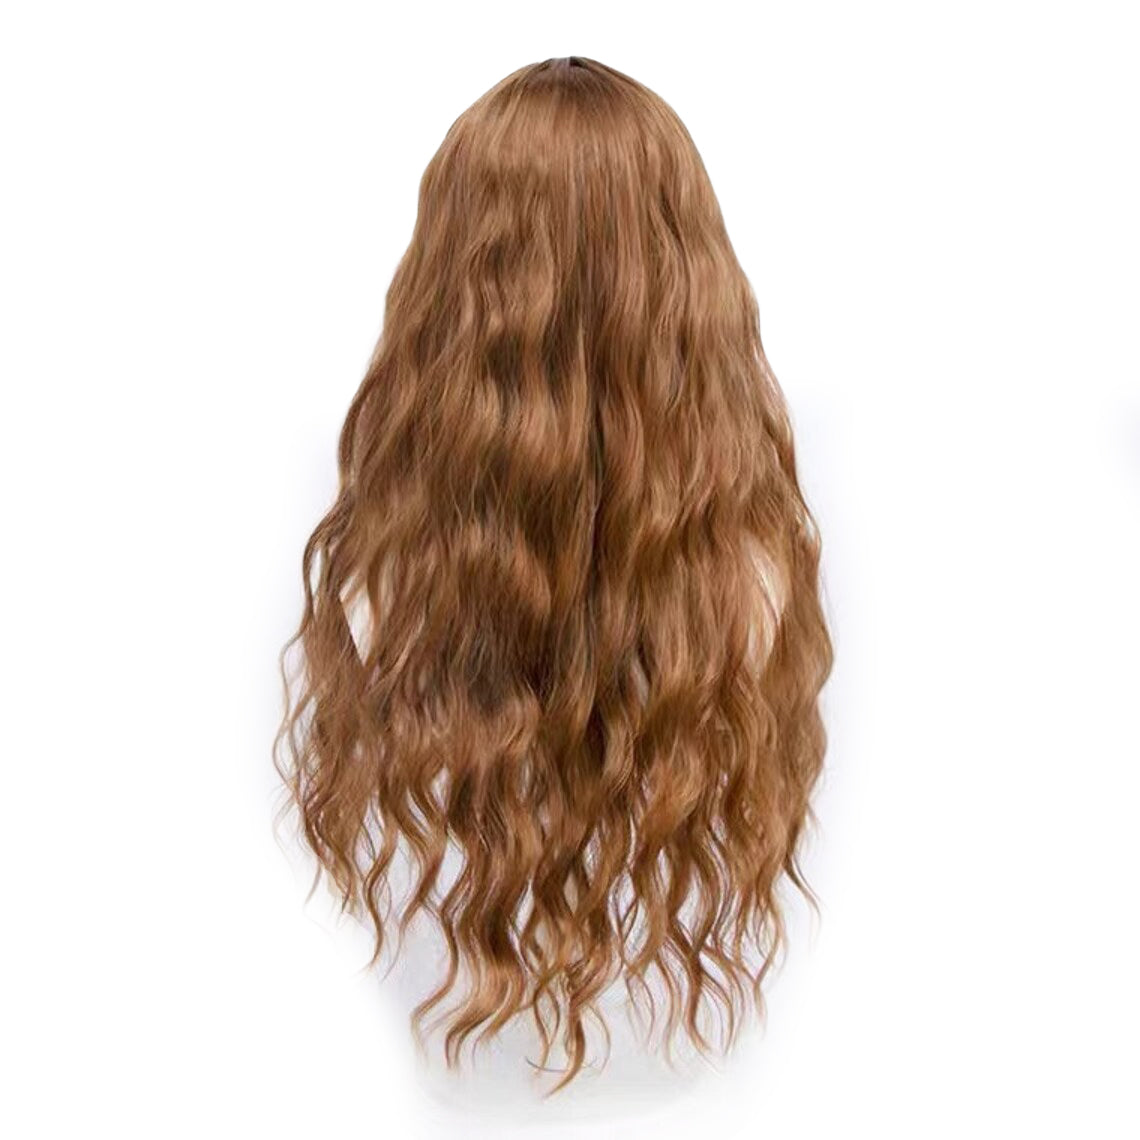 Transform into Hermione Granger: Get the Perfect Wig for Your Wizarding World Cosplay!